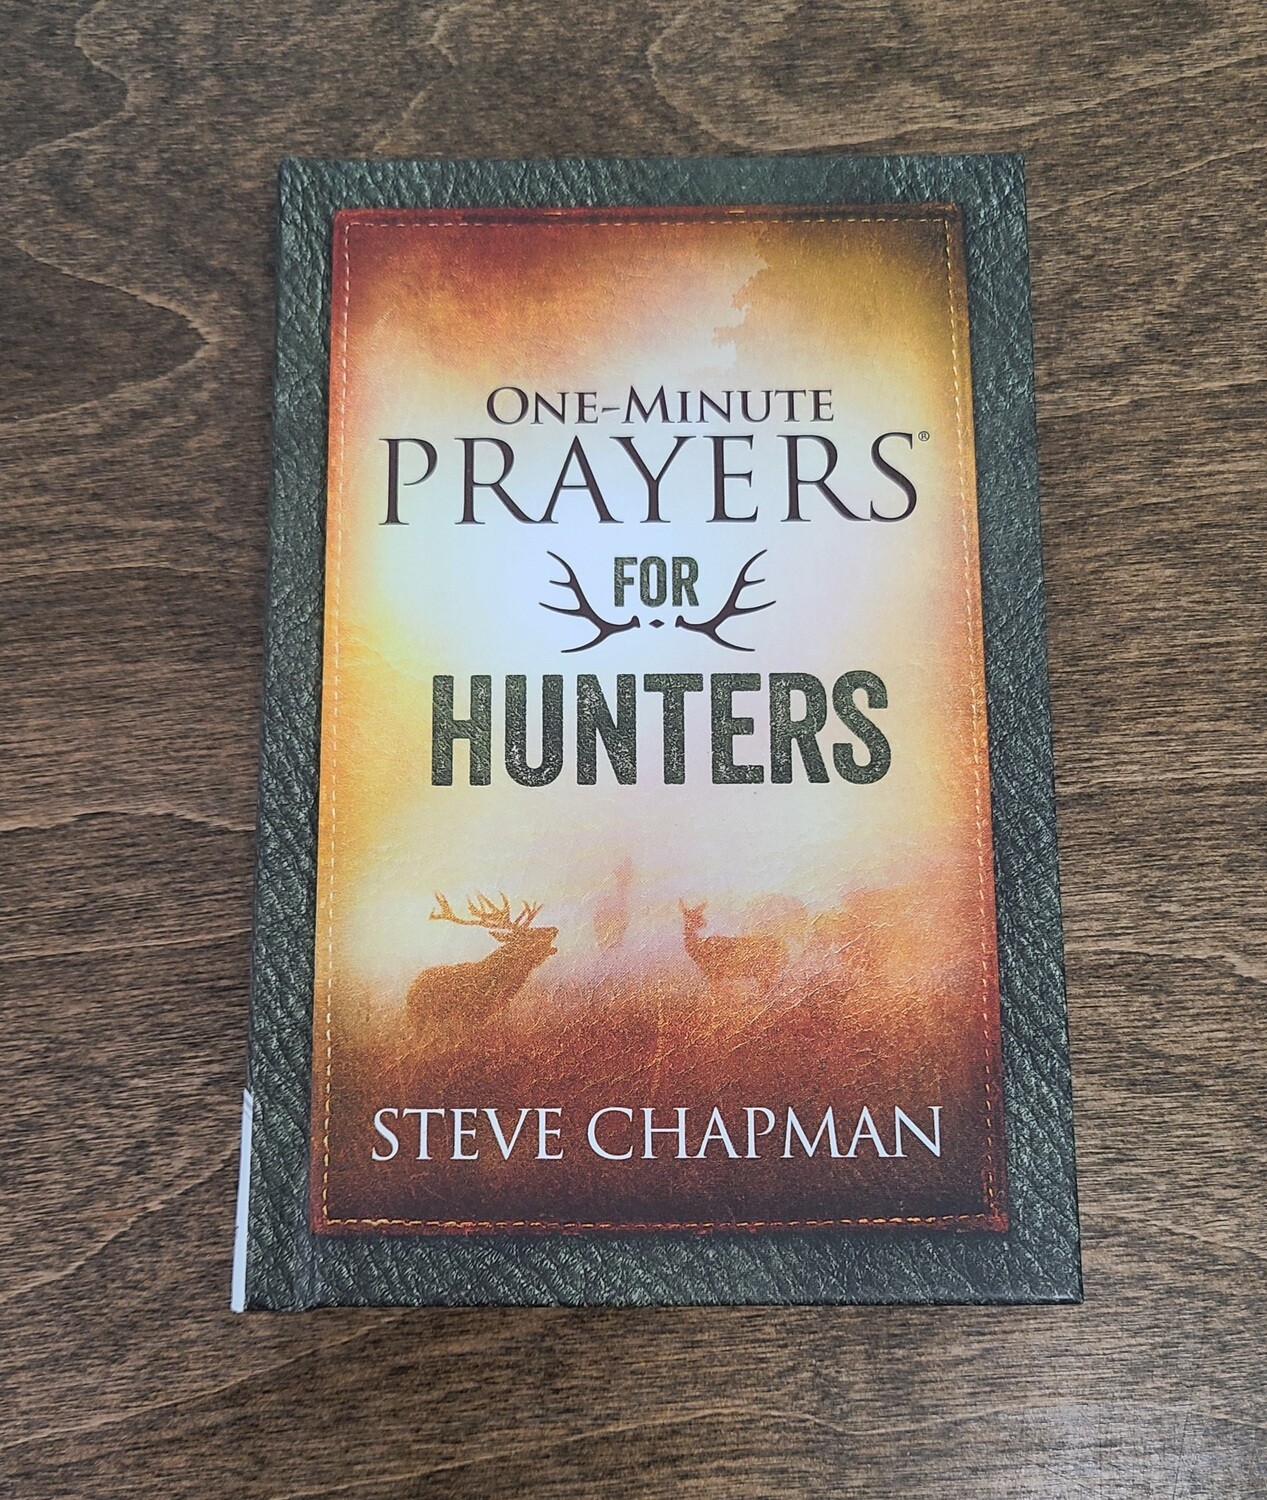 One-Minute Prayers for Hunters by Steve Chapman